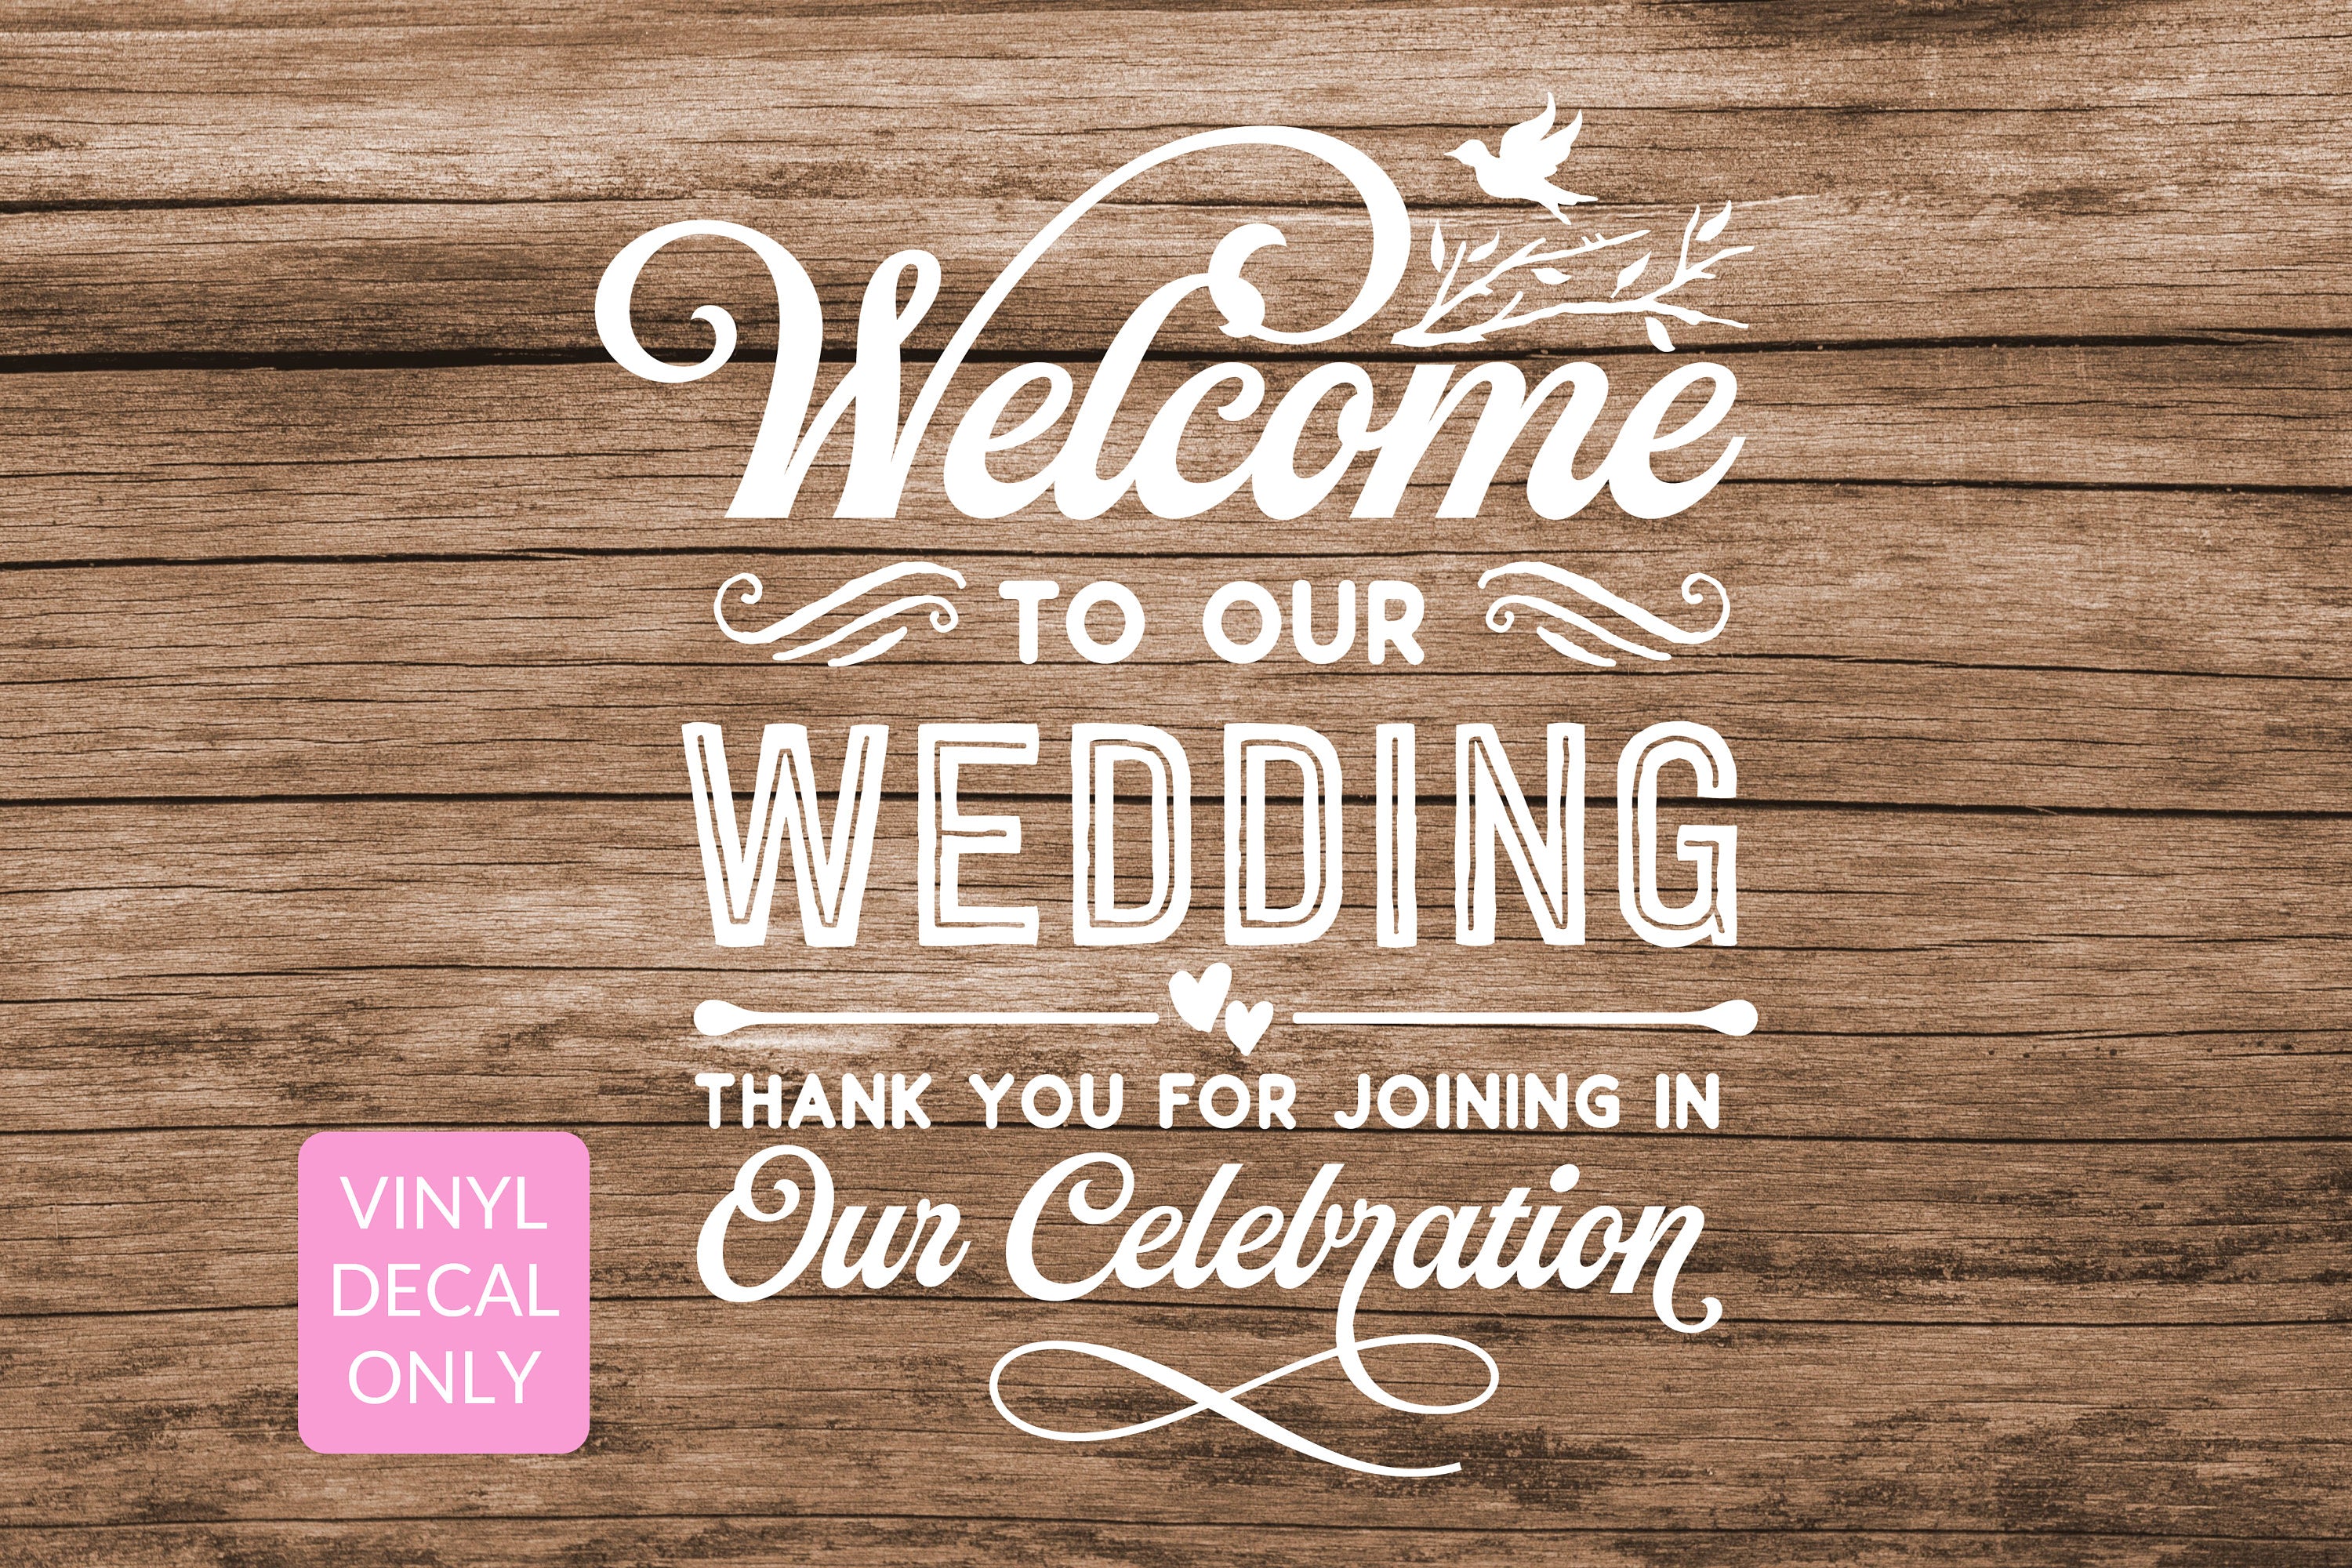 Welcome to our Wedding Vinyl Decal for DIY Wedding Ceremony & Reception, Event, Party Signs, for Wood, Metal, Glass, Walls, Doors